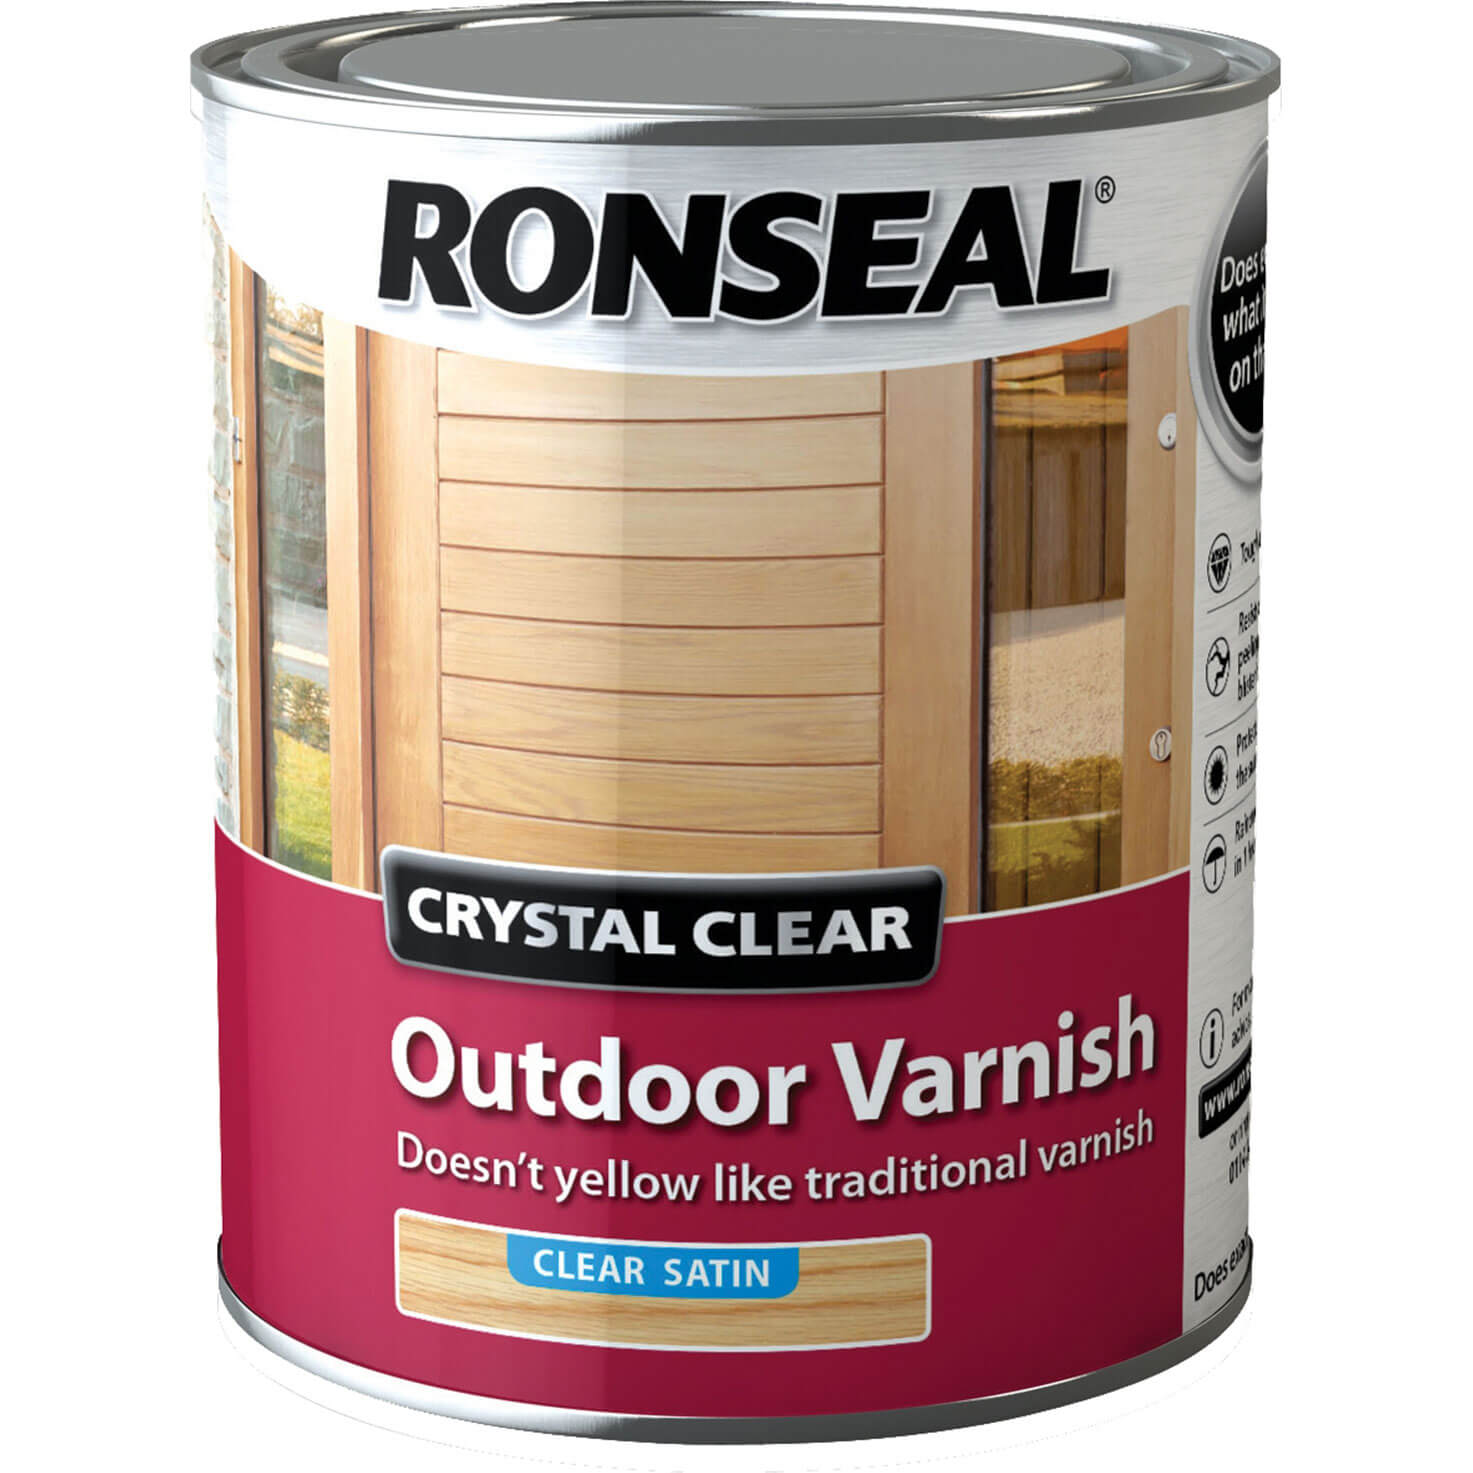 Image of Ronseal Crystal Clear Outdoor Varnish Satin 750ml